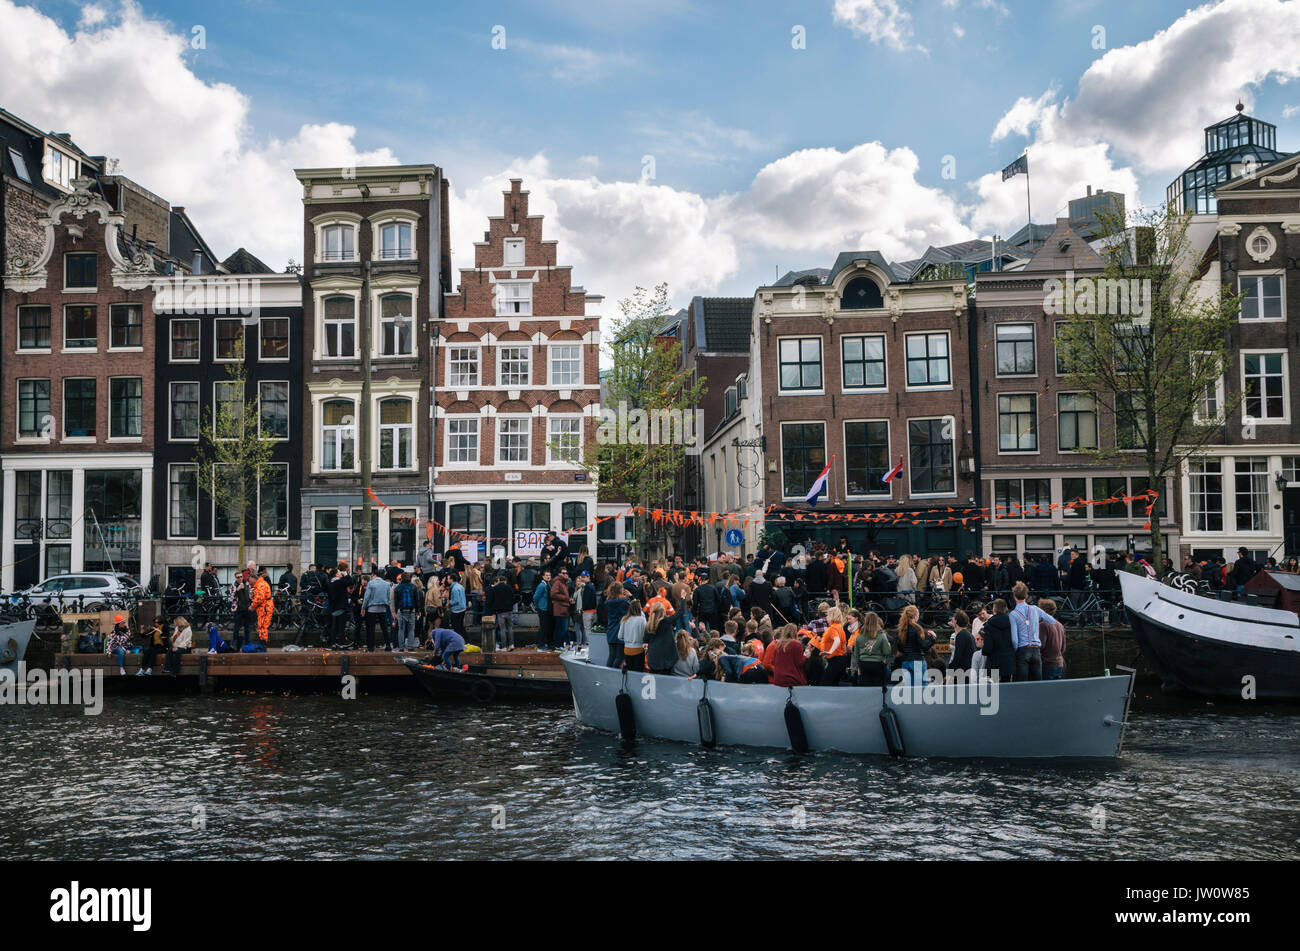 Amsterdam, Netherlands - 27 April, 2017: Local people and tourists dressed in orange clothes ride on boats and participate in celebrating King's Day a Stock Photo